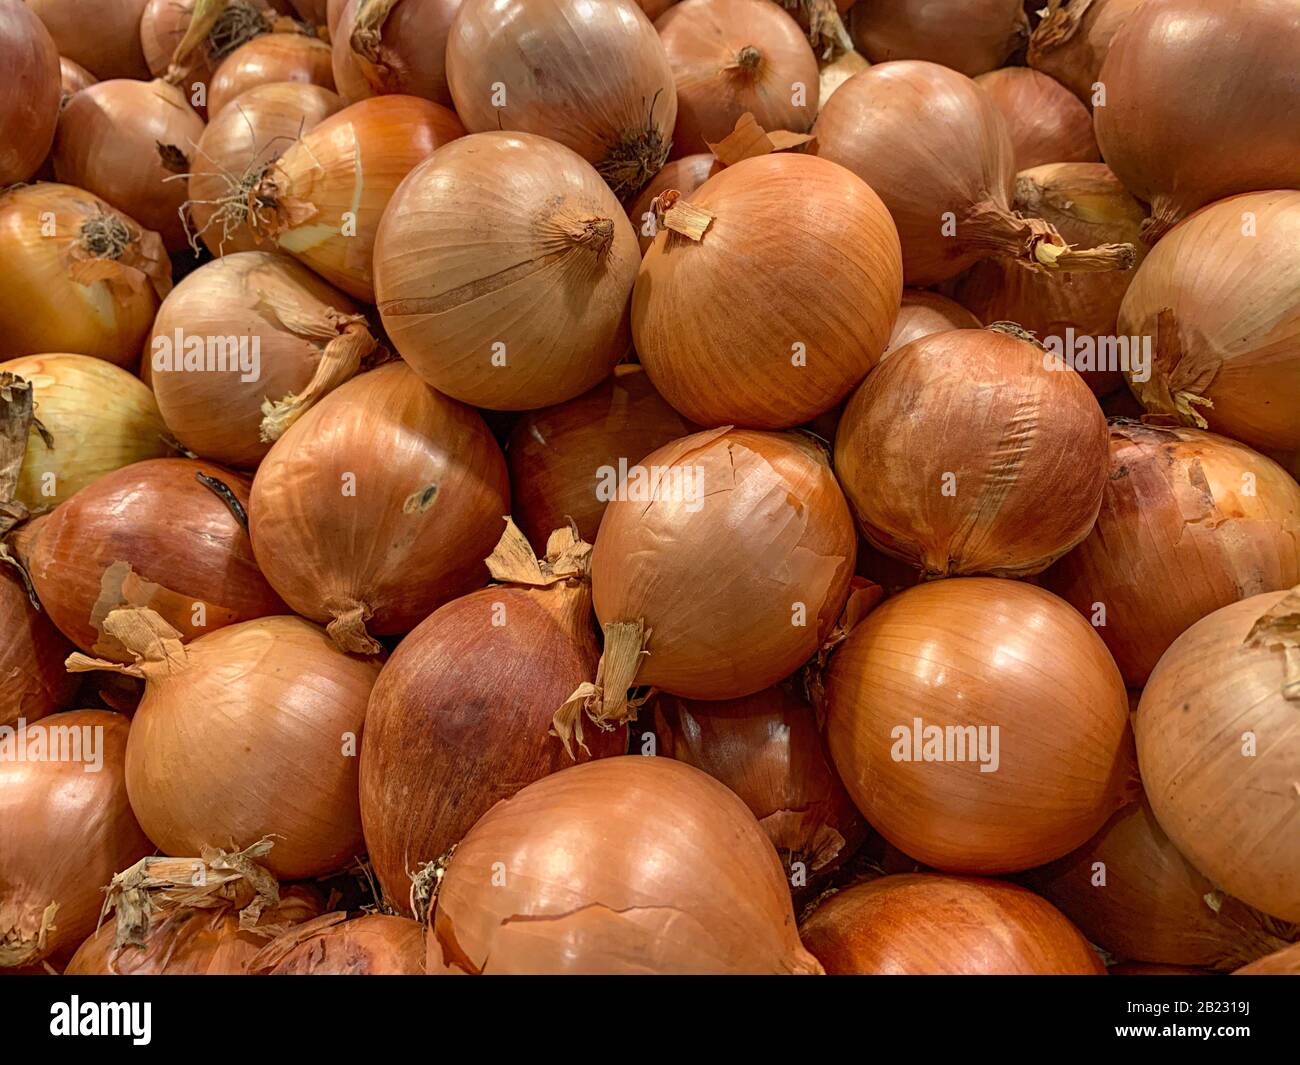 Full frame shot of onions, Panama, Central America Stock Photo